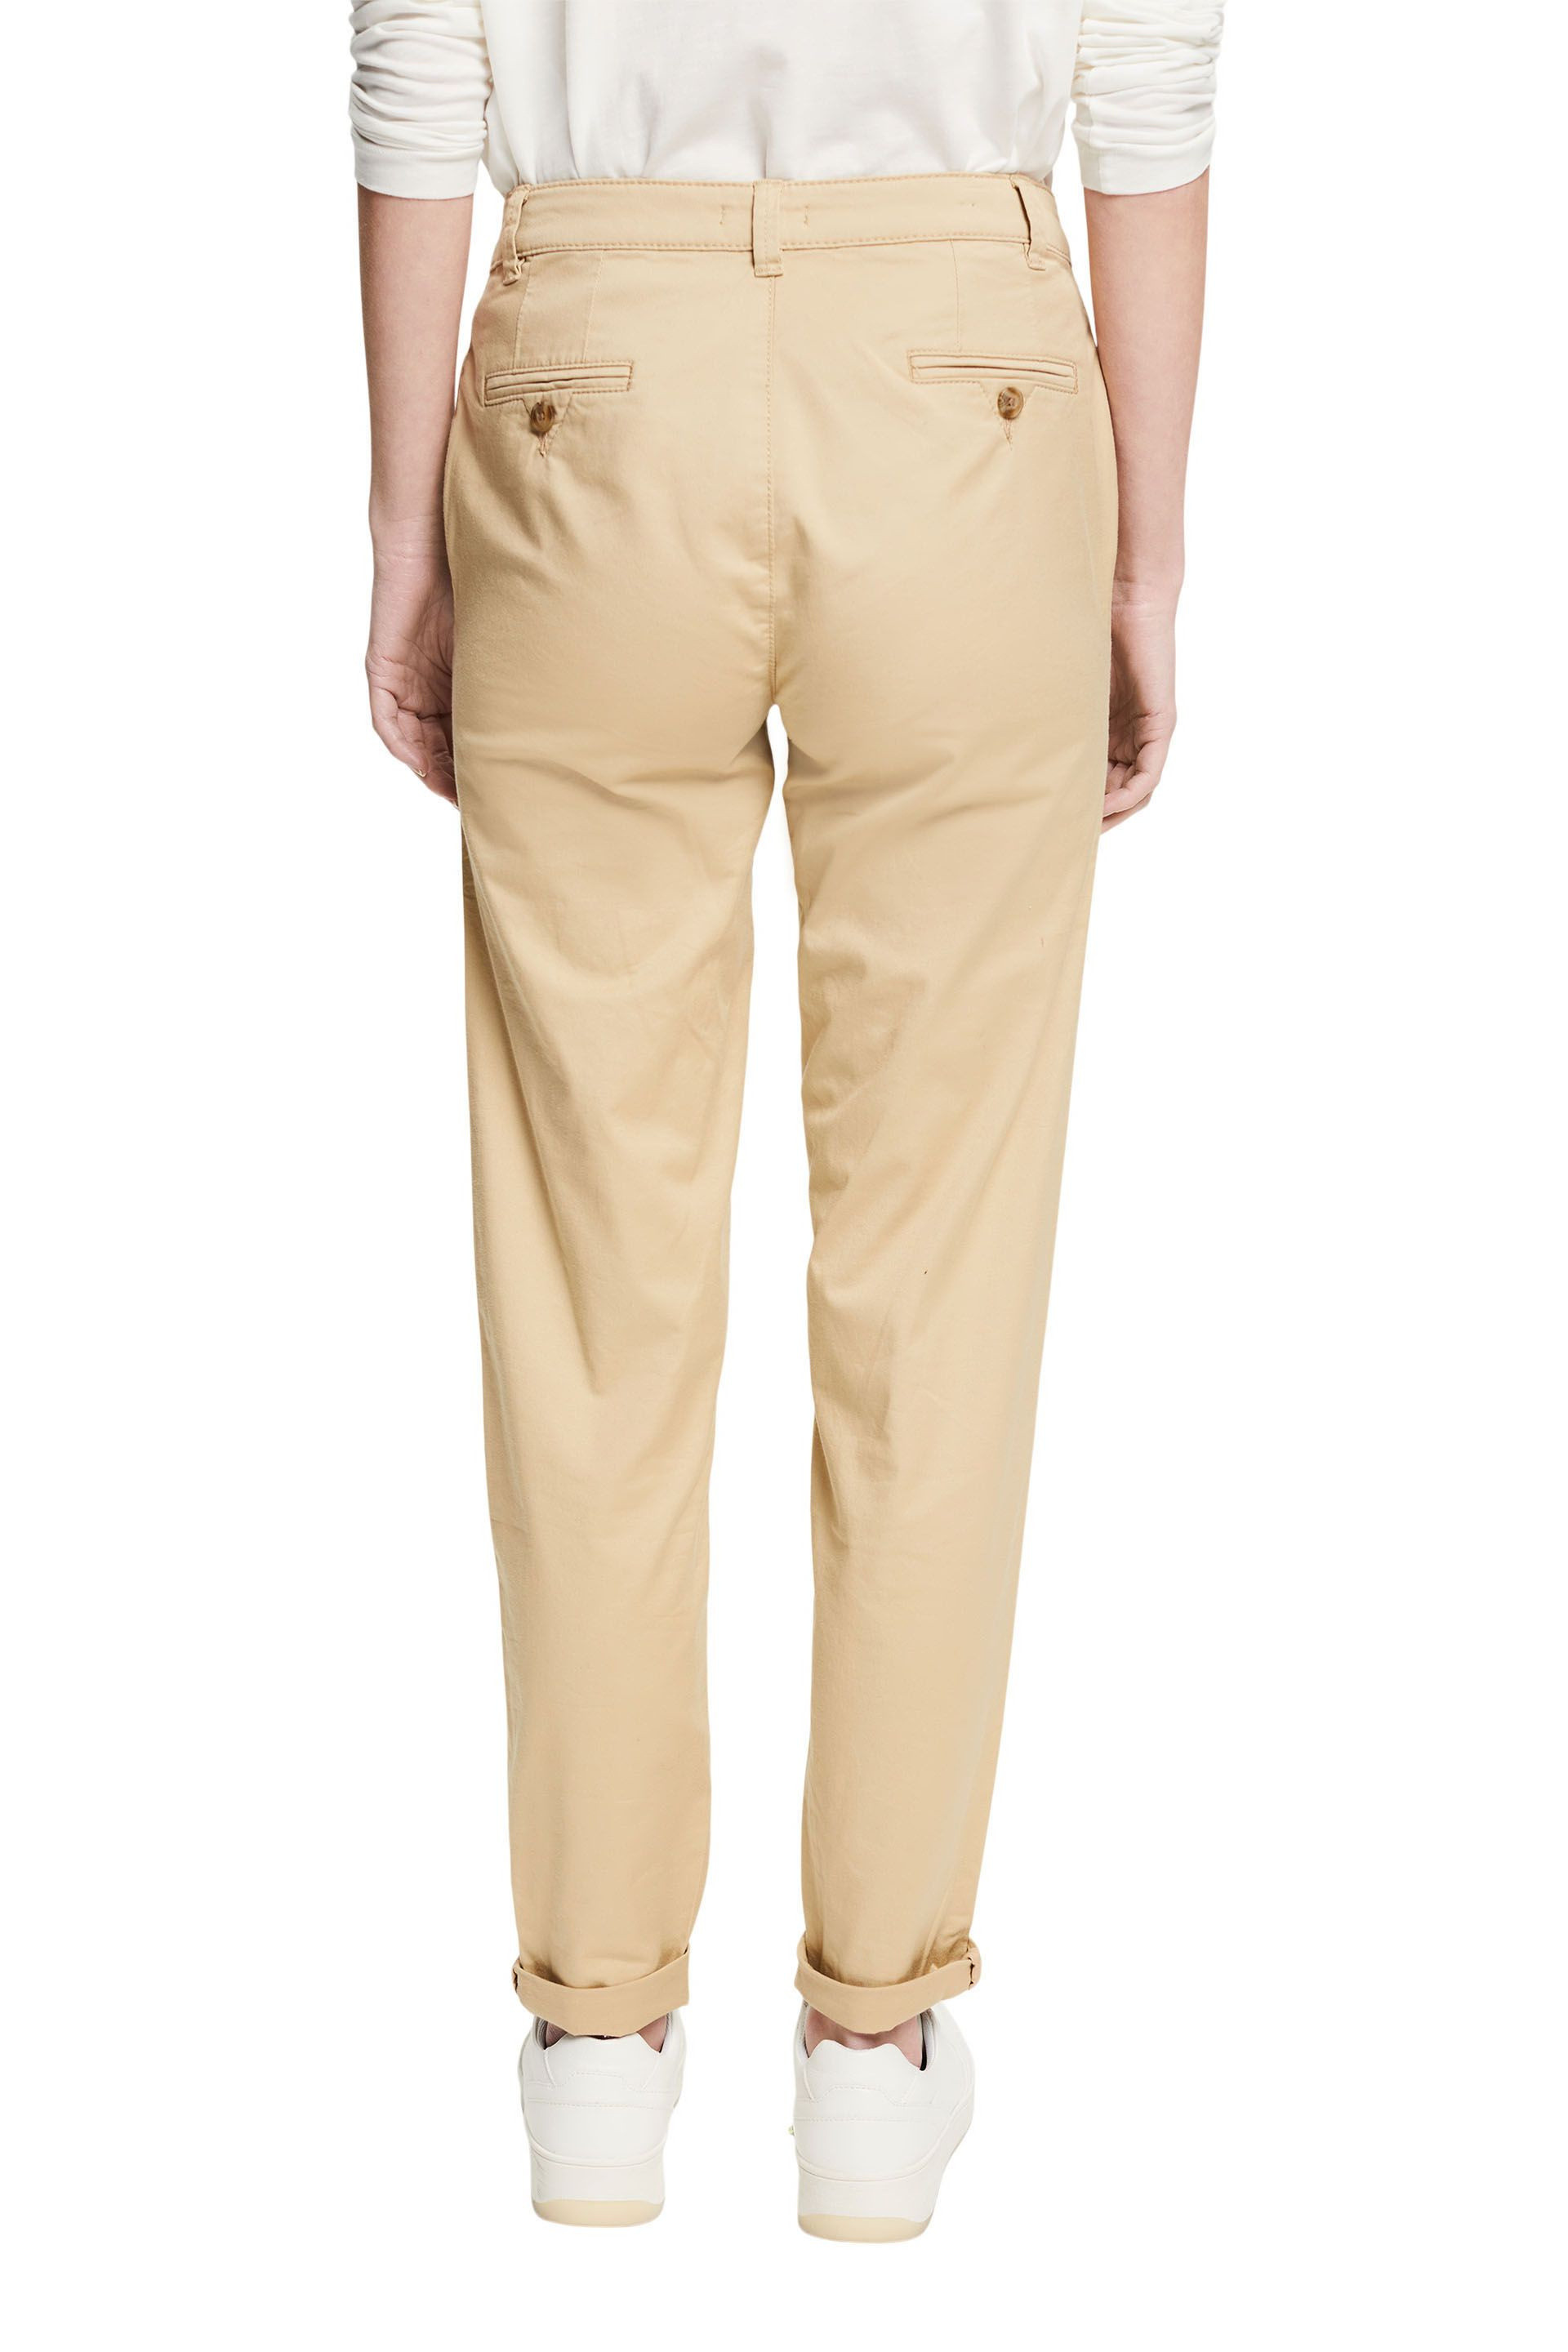 Stretch chino trousers, Beige, large image number 2